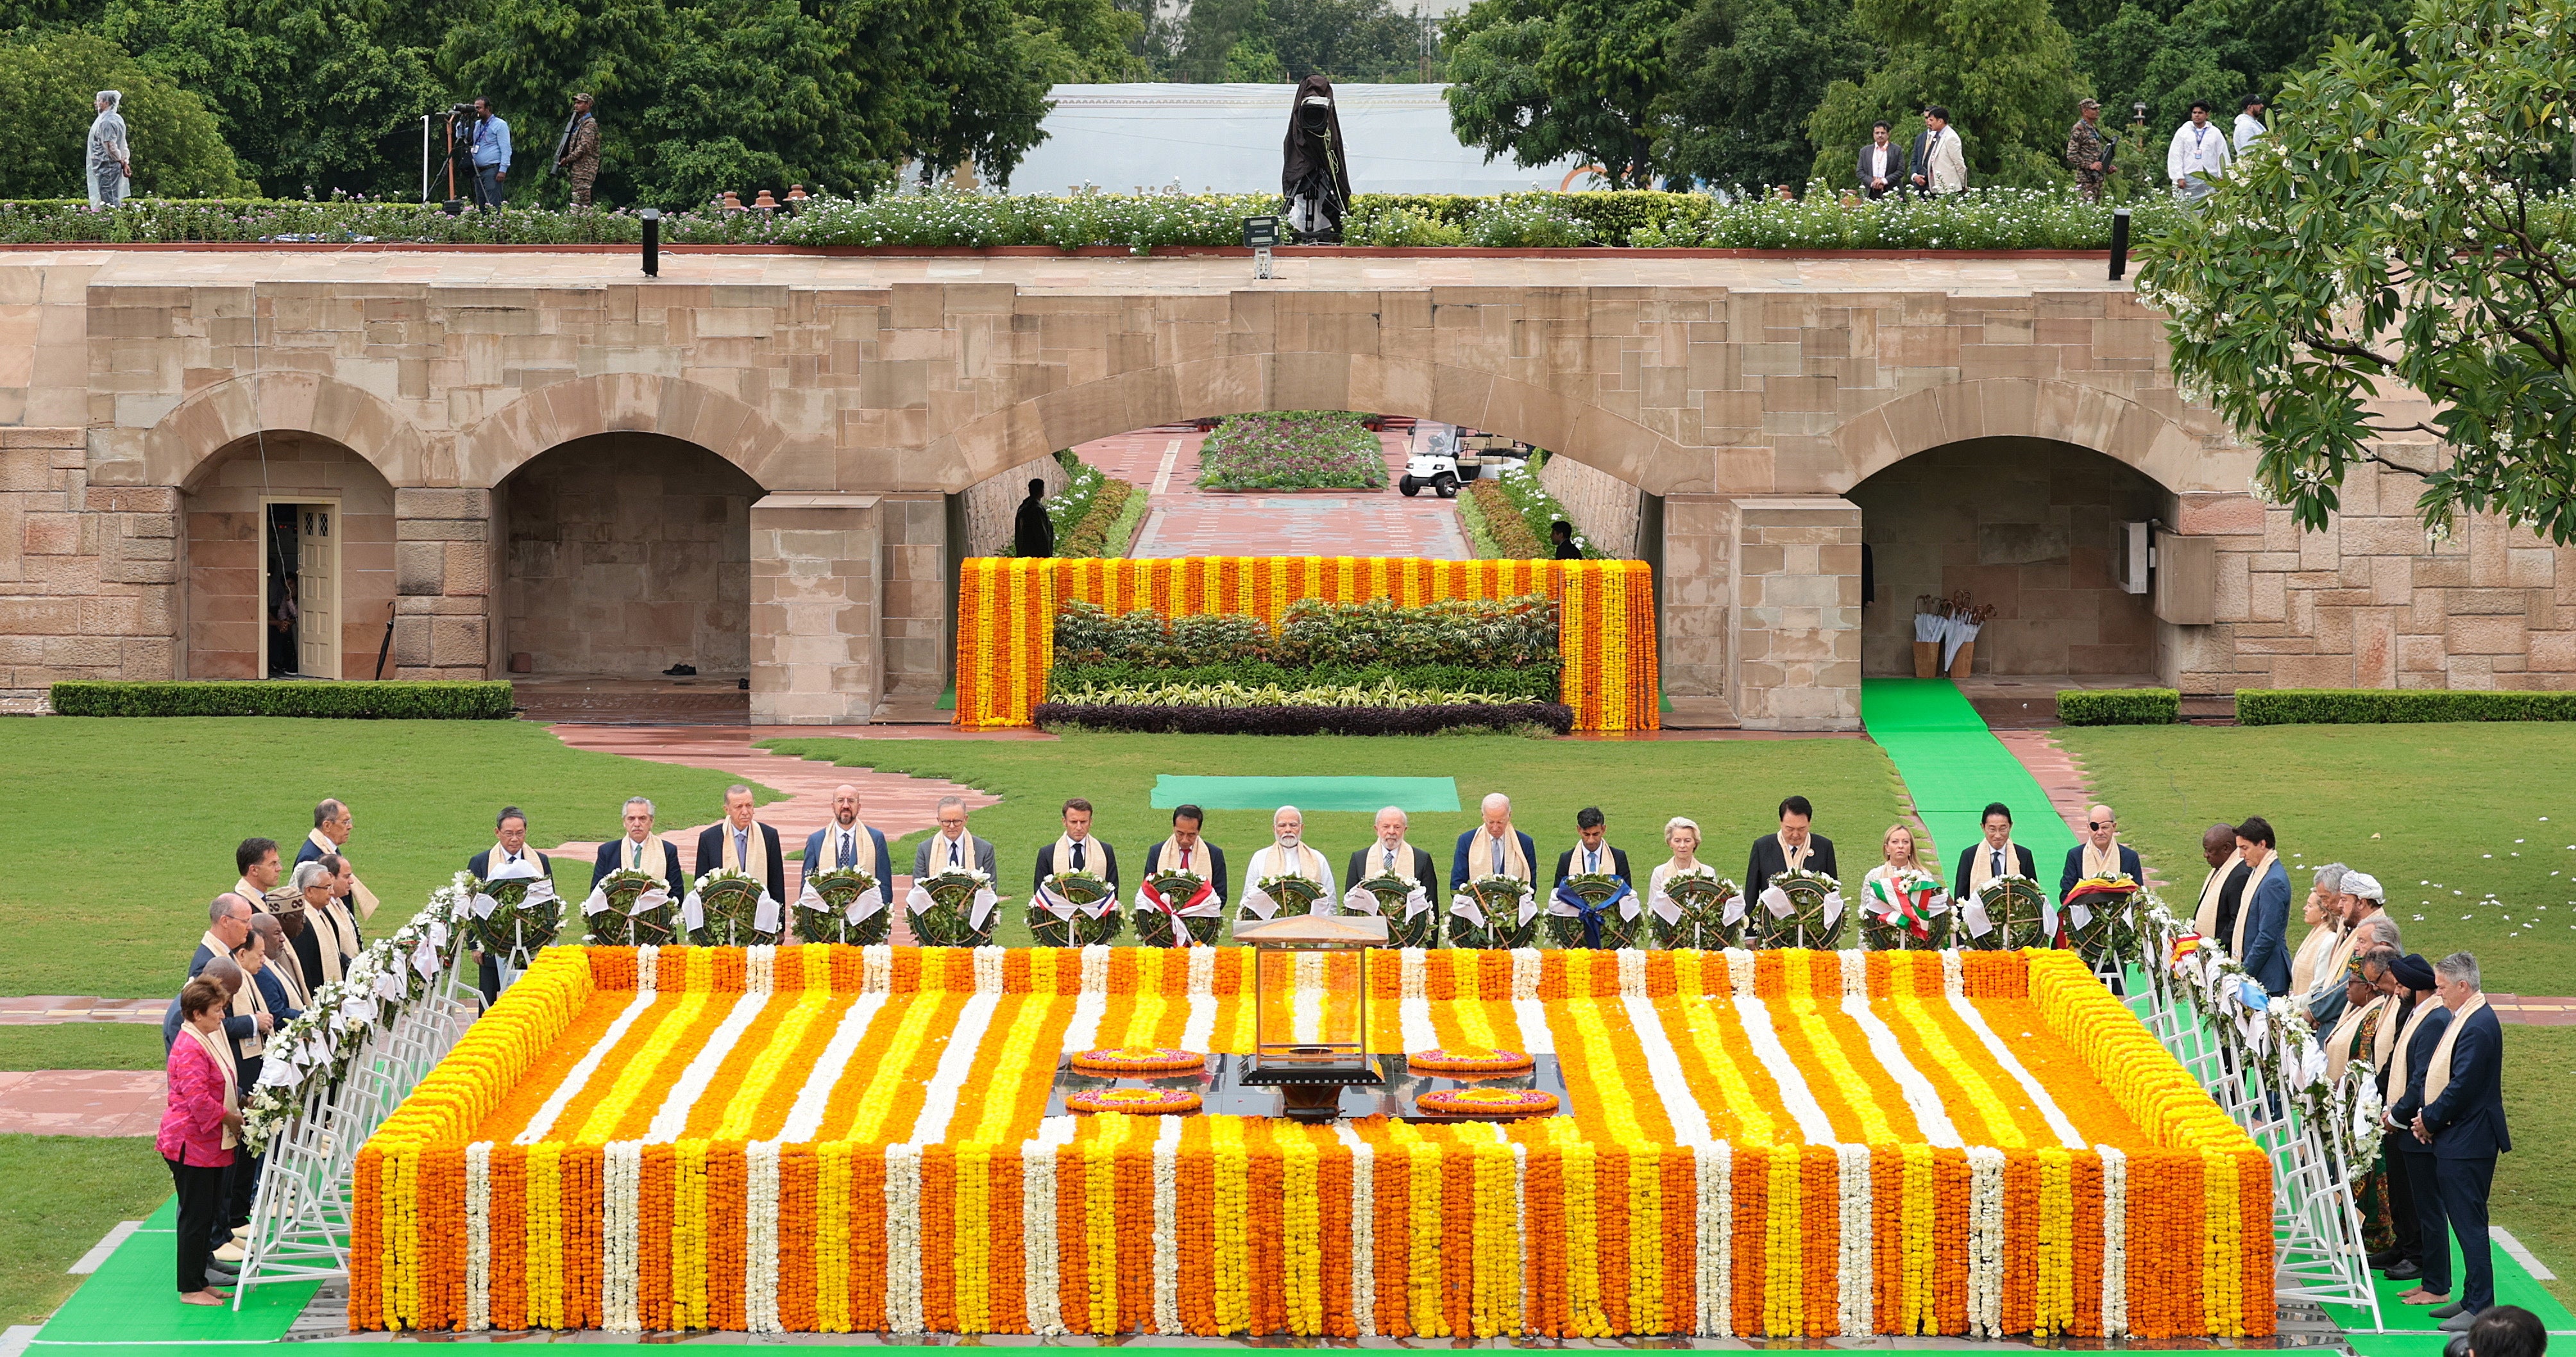 India’s prime minister Narendra Modi, centre, paying homage with other world leaders at Mahatma Gandhi’s memorial in Raj Ghat